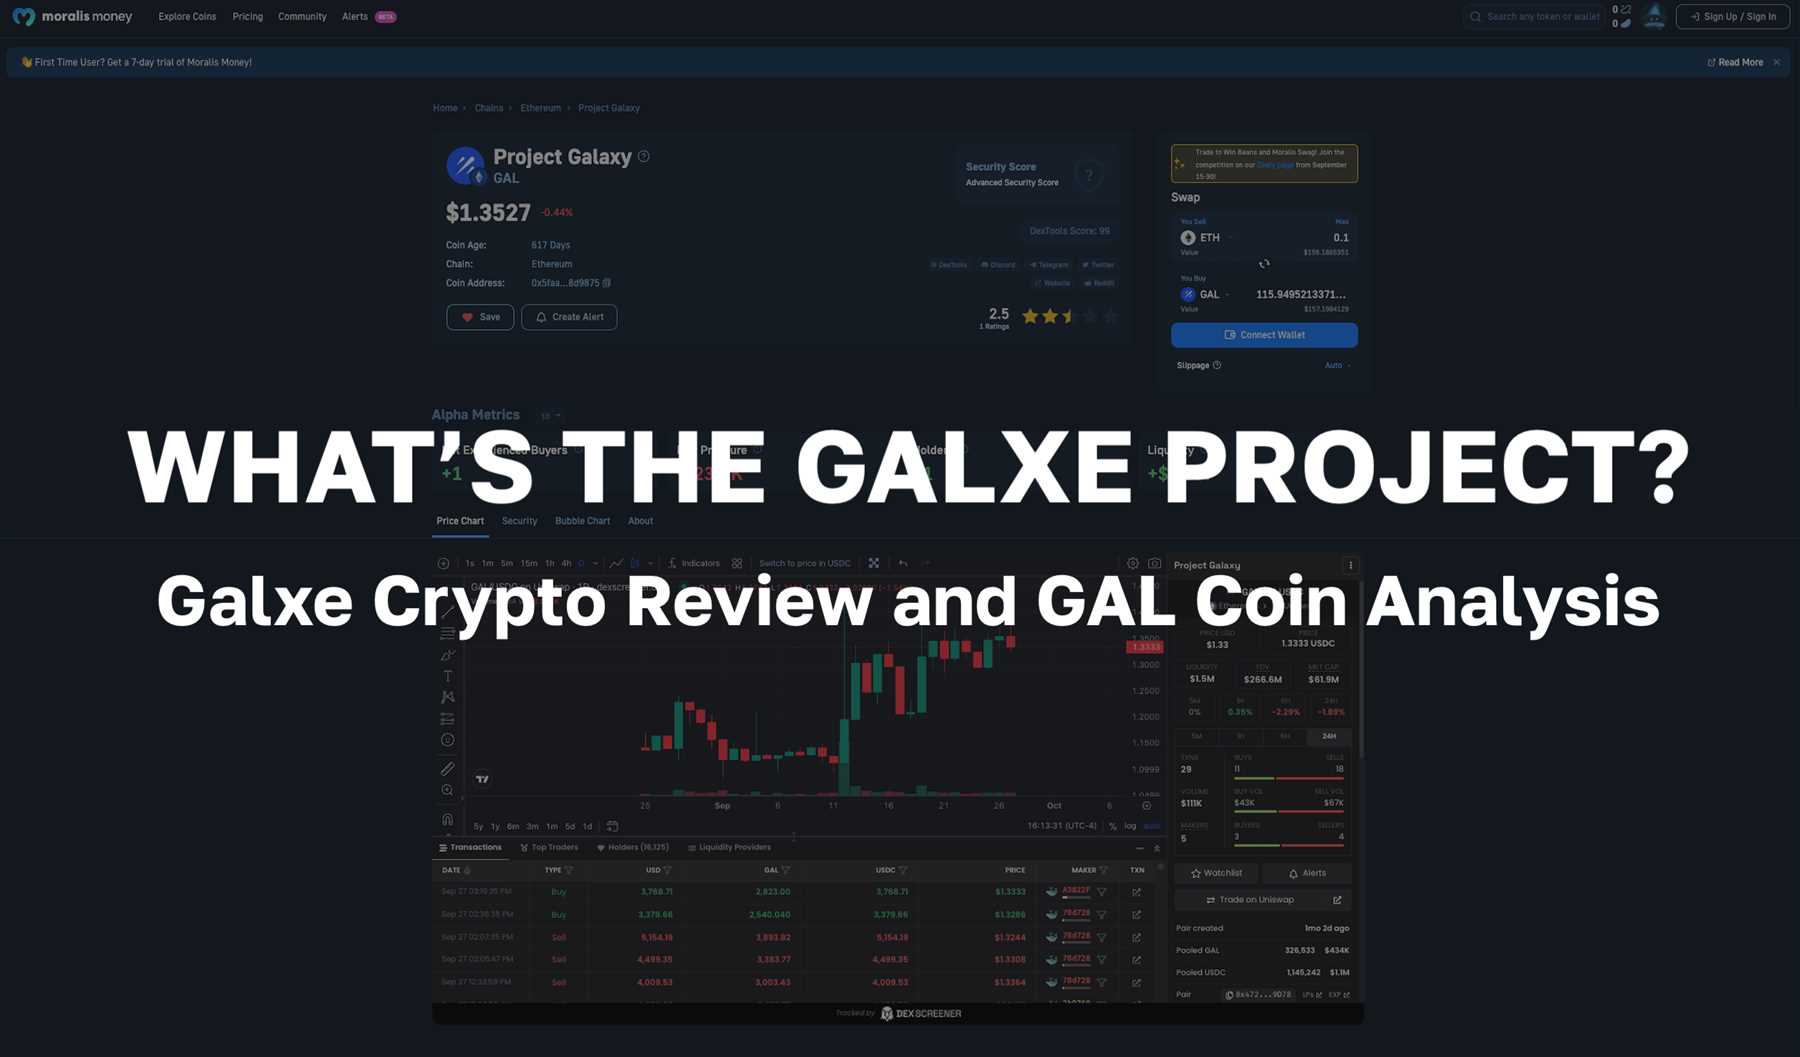 Promising Market Trends for Galxe